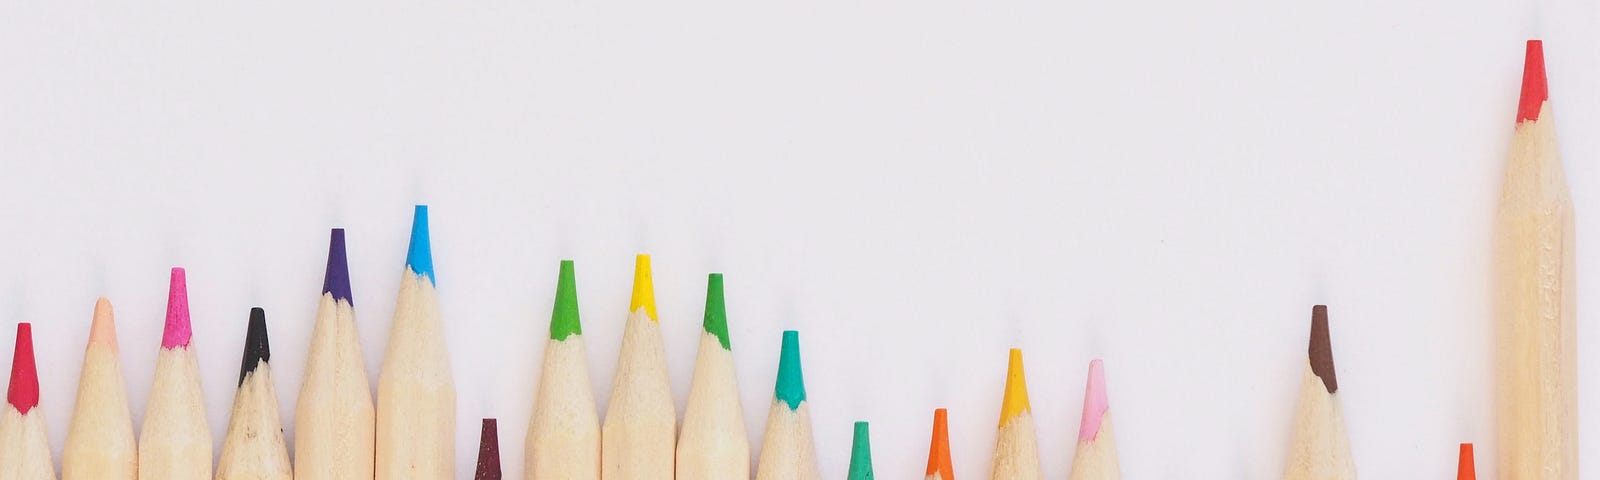 Photo by Jess Bailey on Unsplash showing a line of brightly colored pencils lined up at different heights